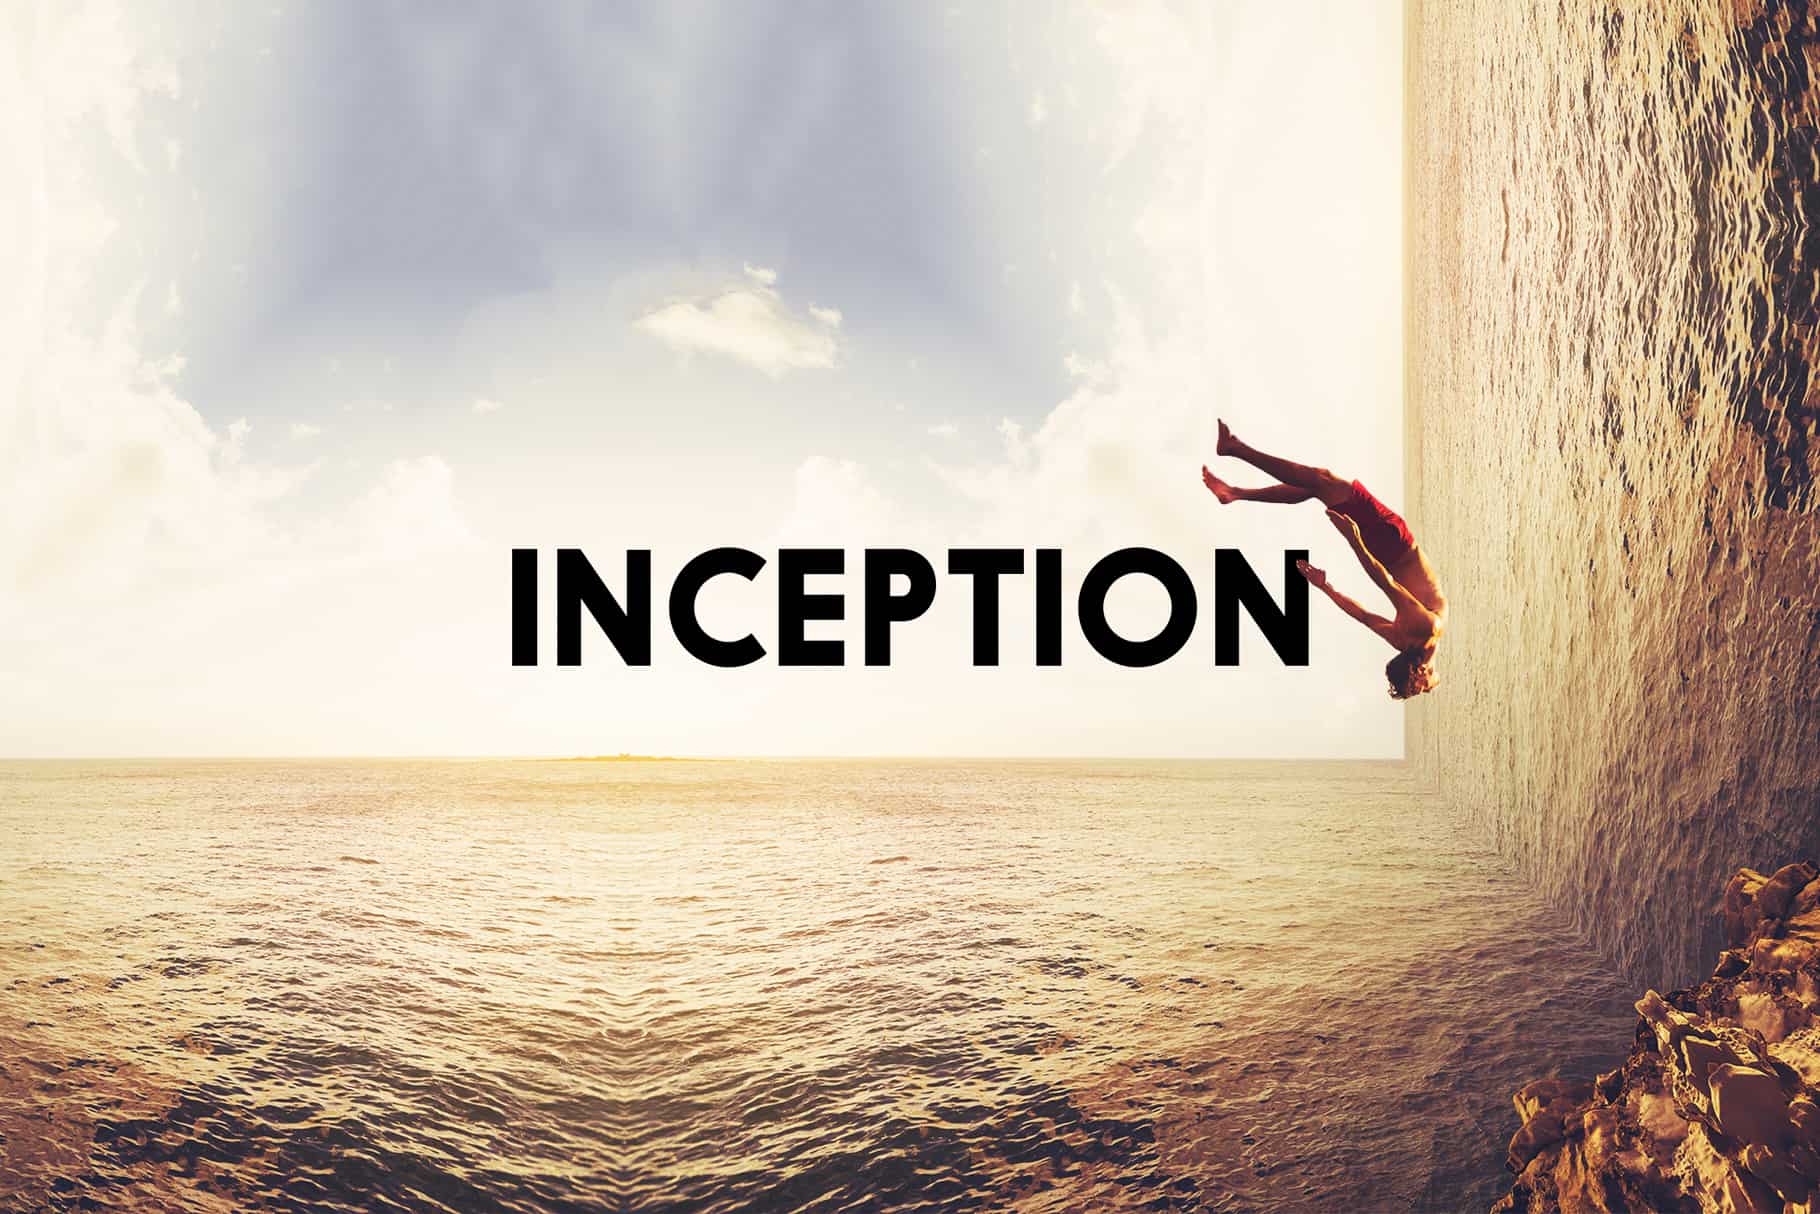 These Photoshop Actions Transform Your Landscapes Like Inception